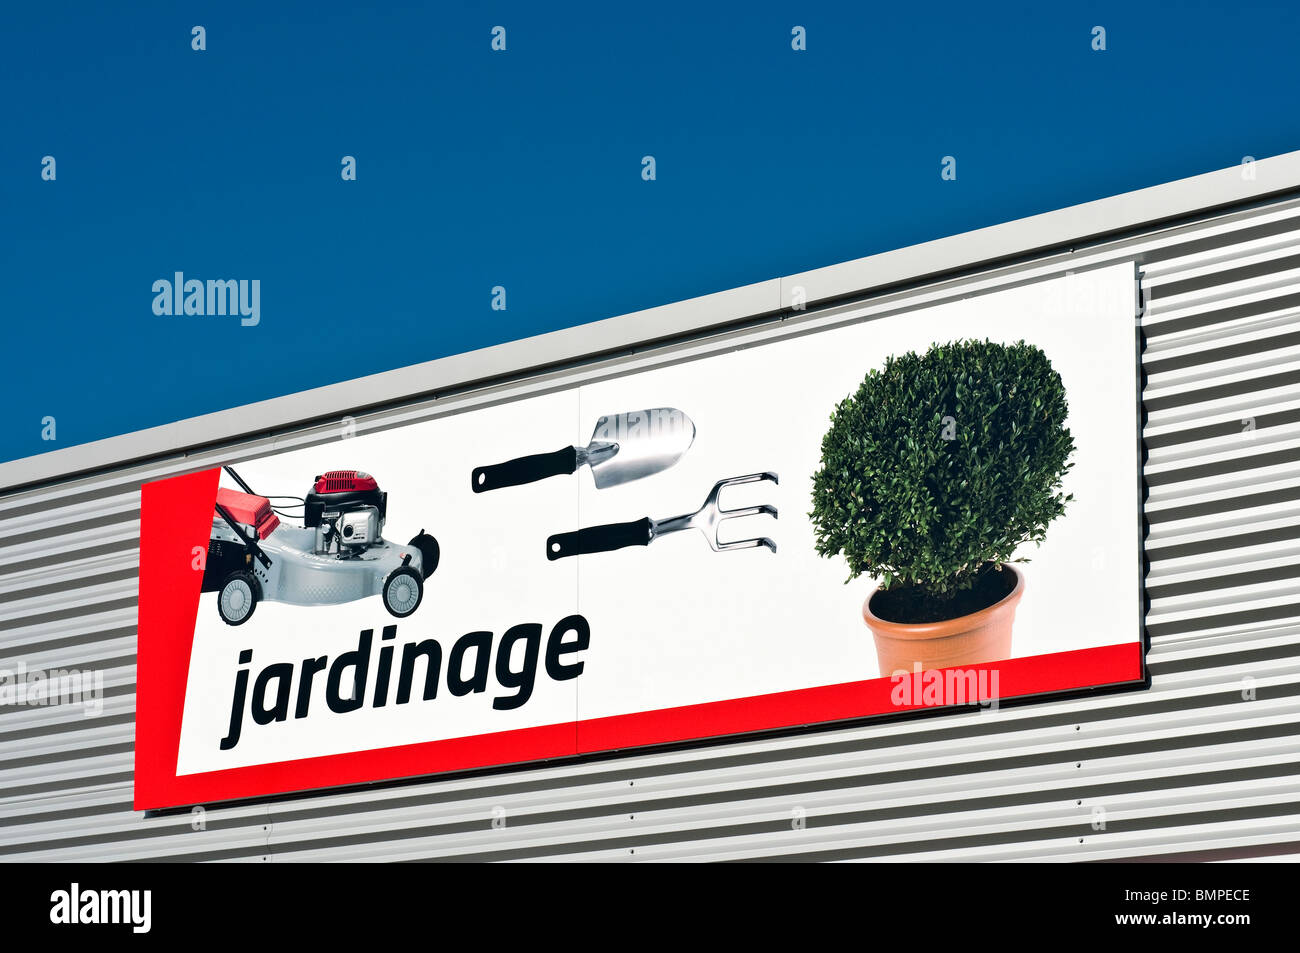 Bricomarché D-I-Y store 'jardinage' supplies advertising sign, France. Stock Photo